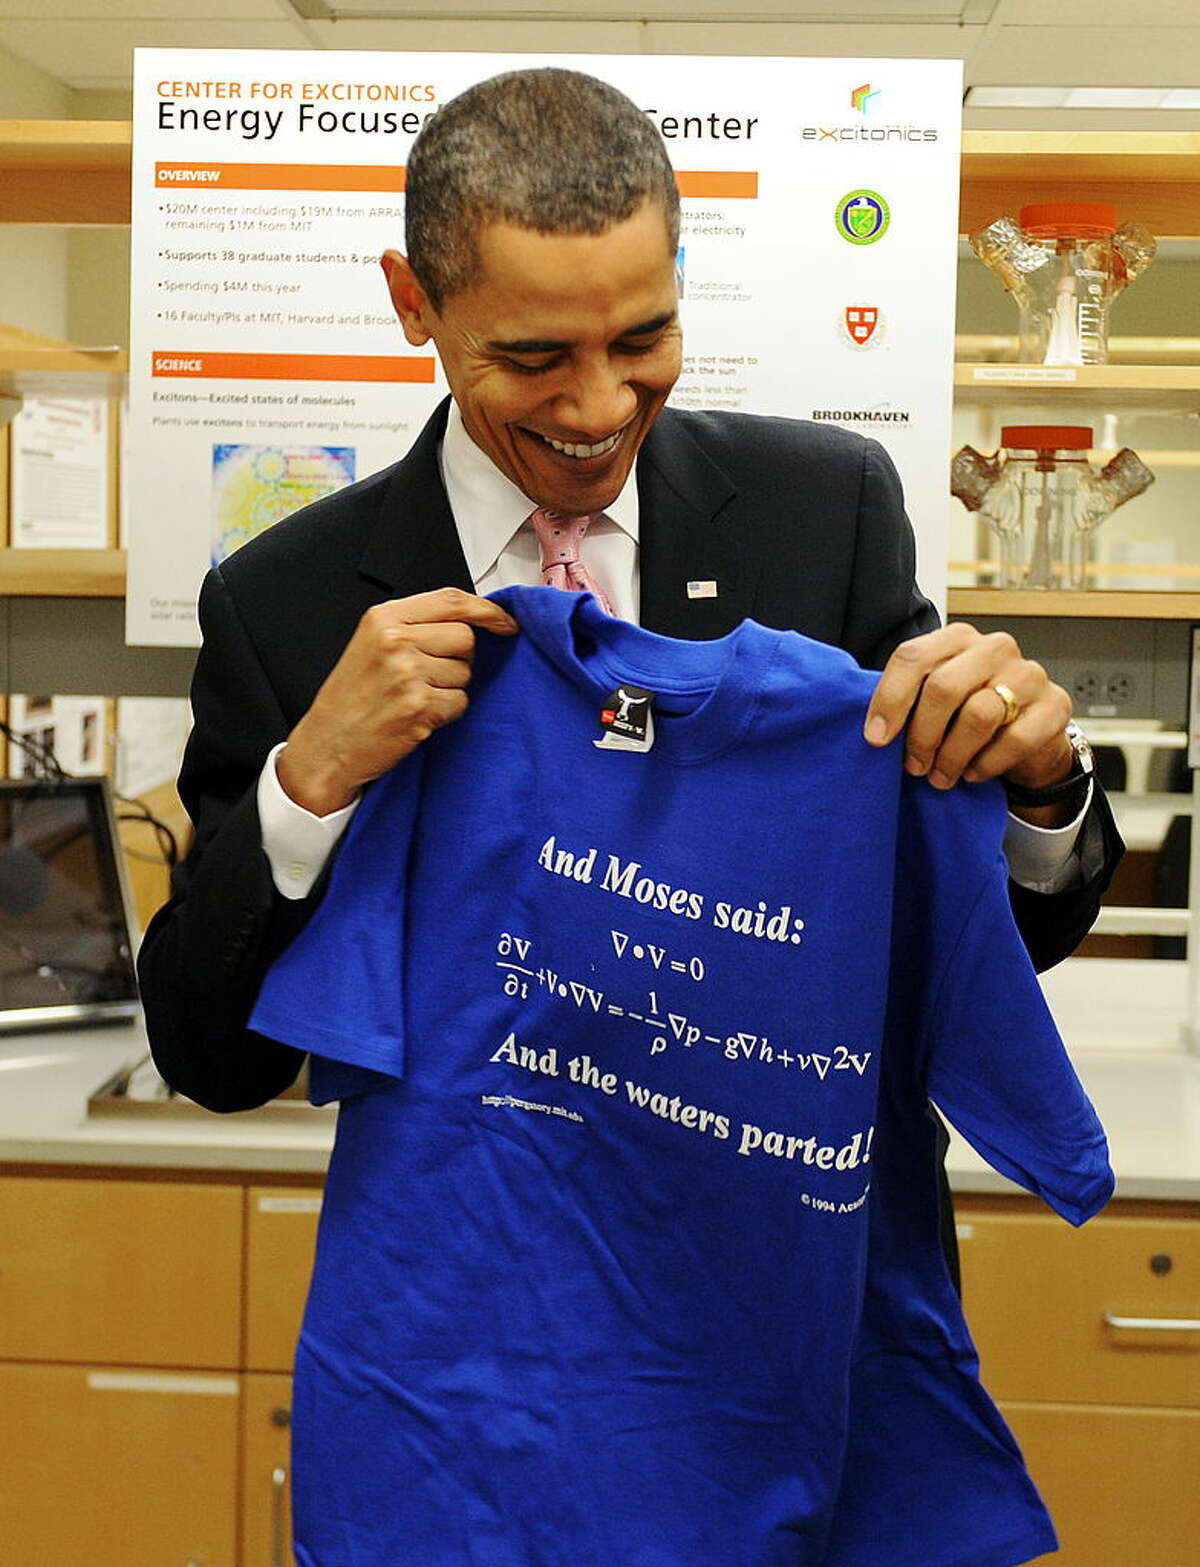 U.S. President Barack Obama holds a T-shirt given to him as he toured a research laboratory at the Massachusetts Institute of Technology in Cambridge, Mass., on Oct. 23, 2009. Take look at some of the controversies that have plagued Texas Agriculture Commissioner Sid Miller. 